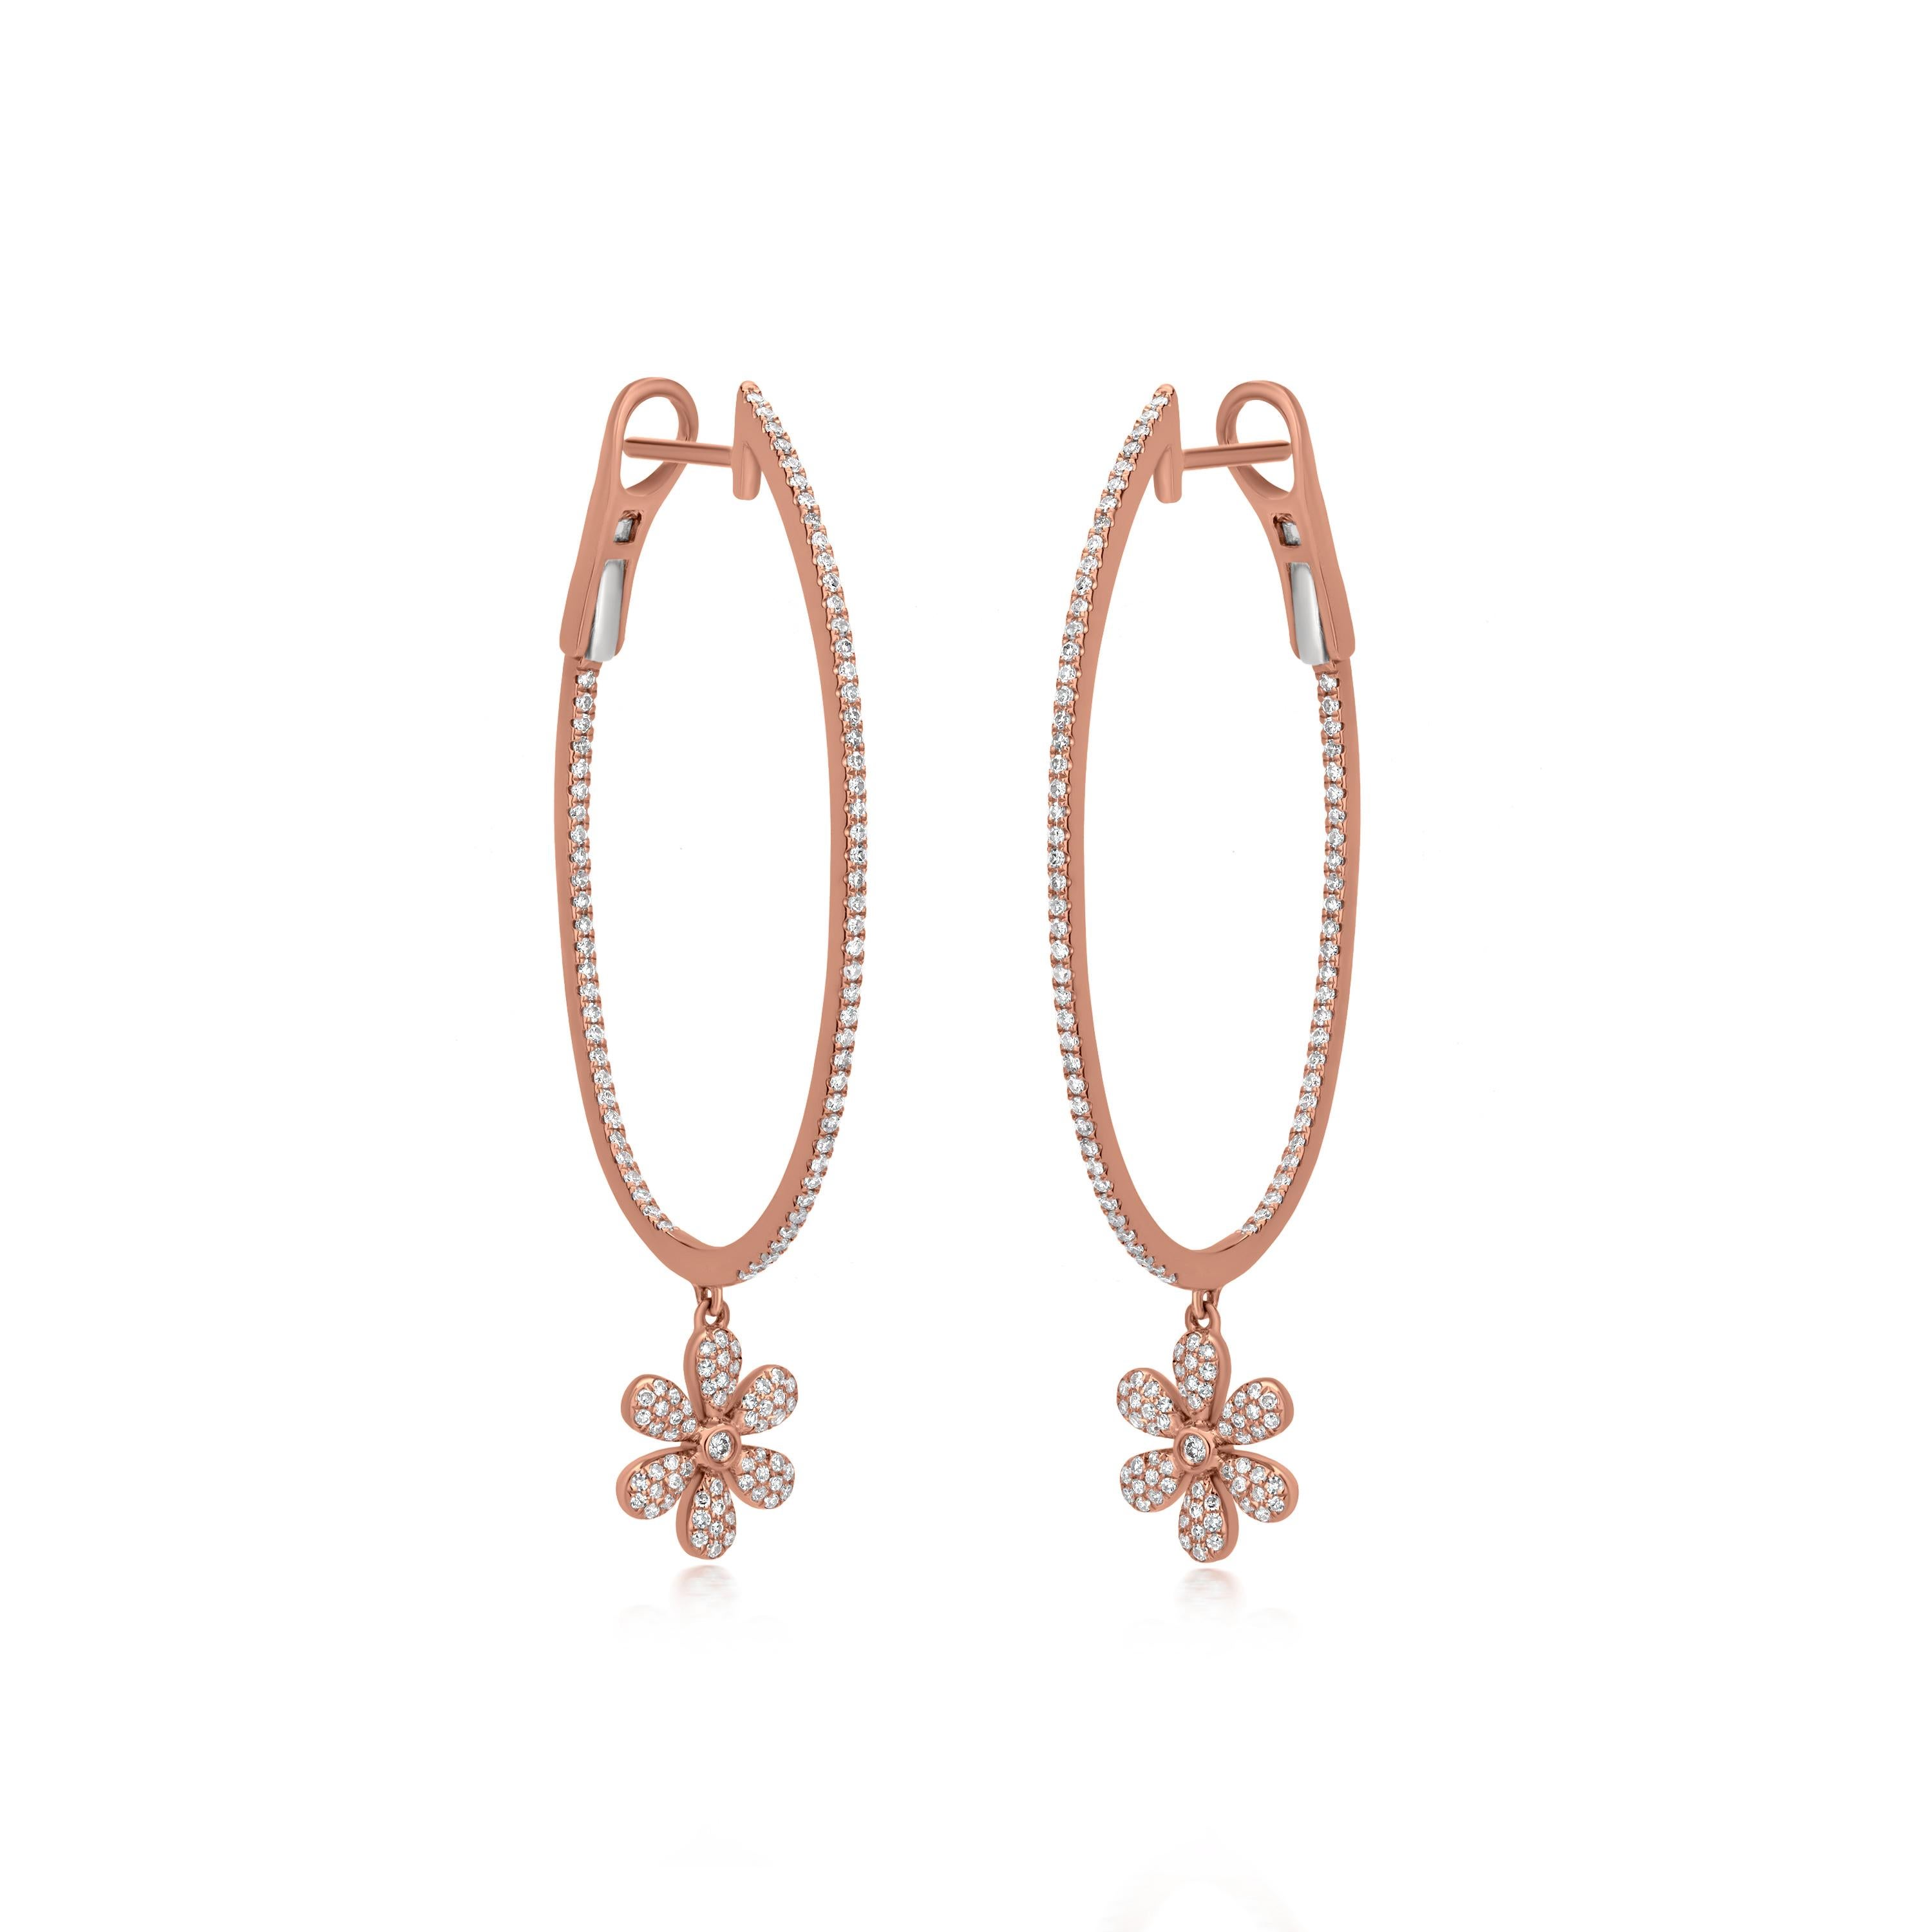 This sleek omega back pair of white diamond earring is crafted by Luxle on an 18K Rose Gold body, with a six-petalled flower in the lower dangling area. The diamonds weigh 0.81 carats, making this a lightweight pair having round single-cut and